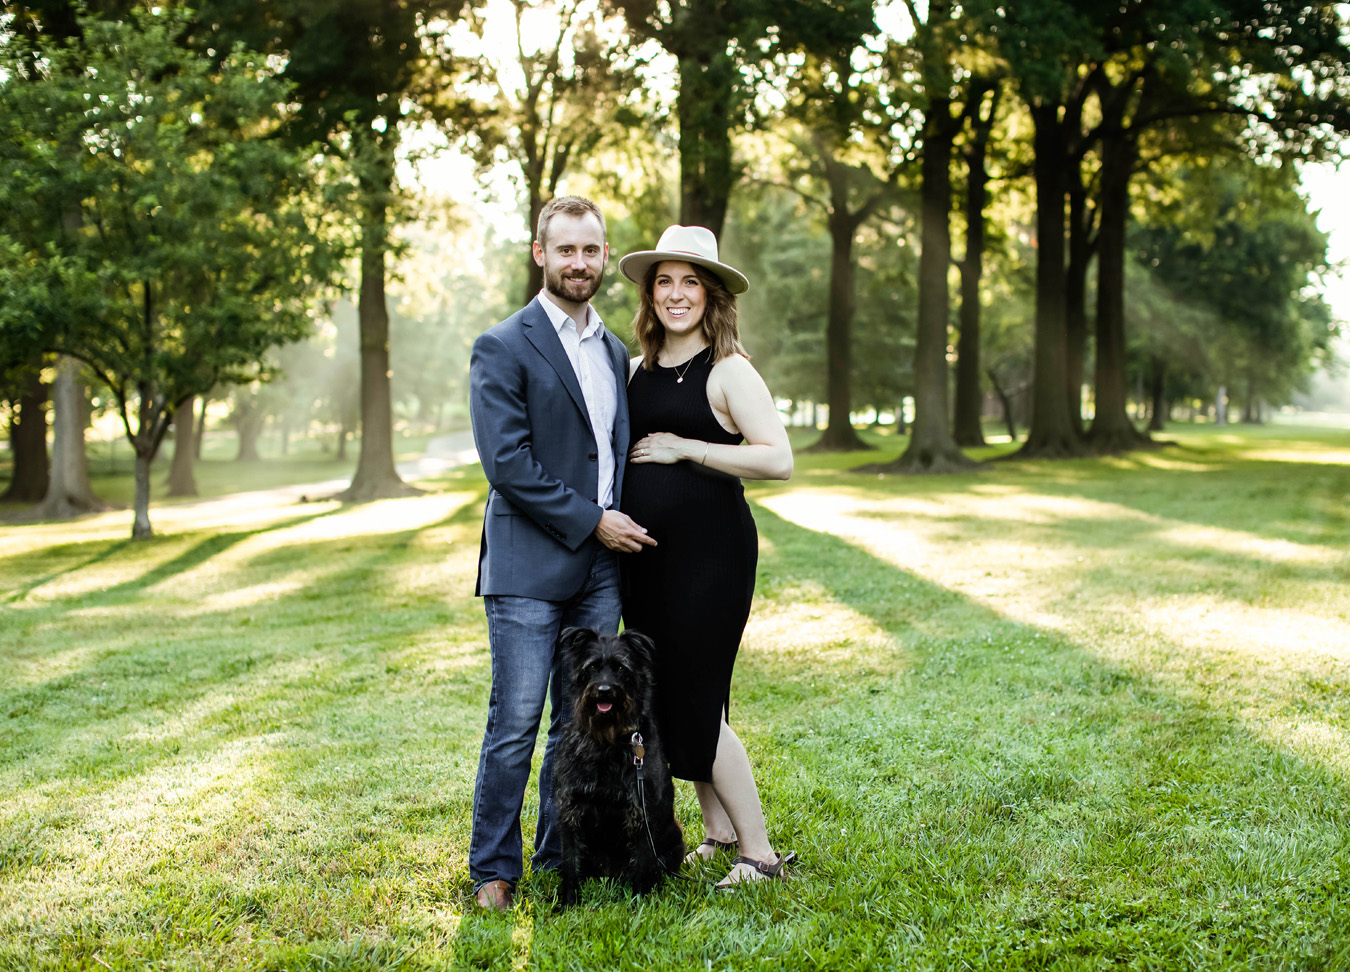 northern Virginia maternity session in a park featuring a husband, wife, and dog